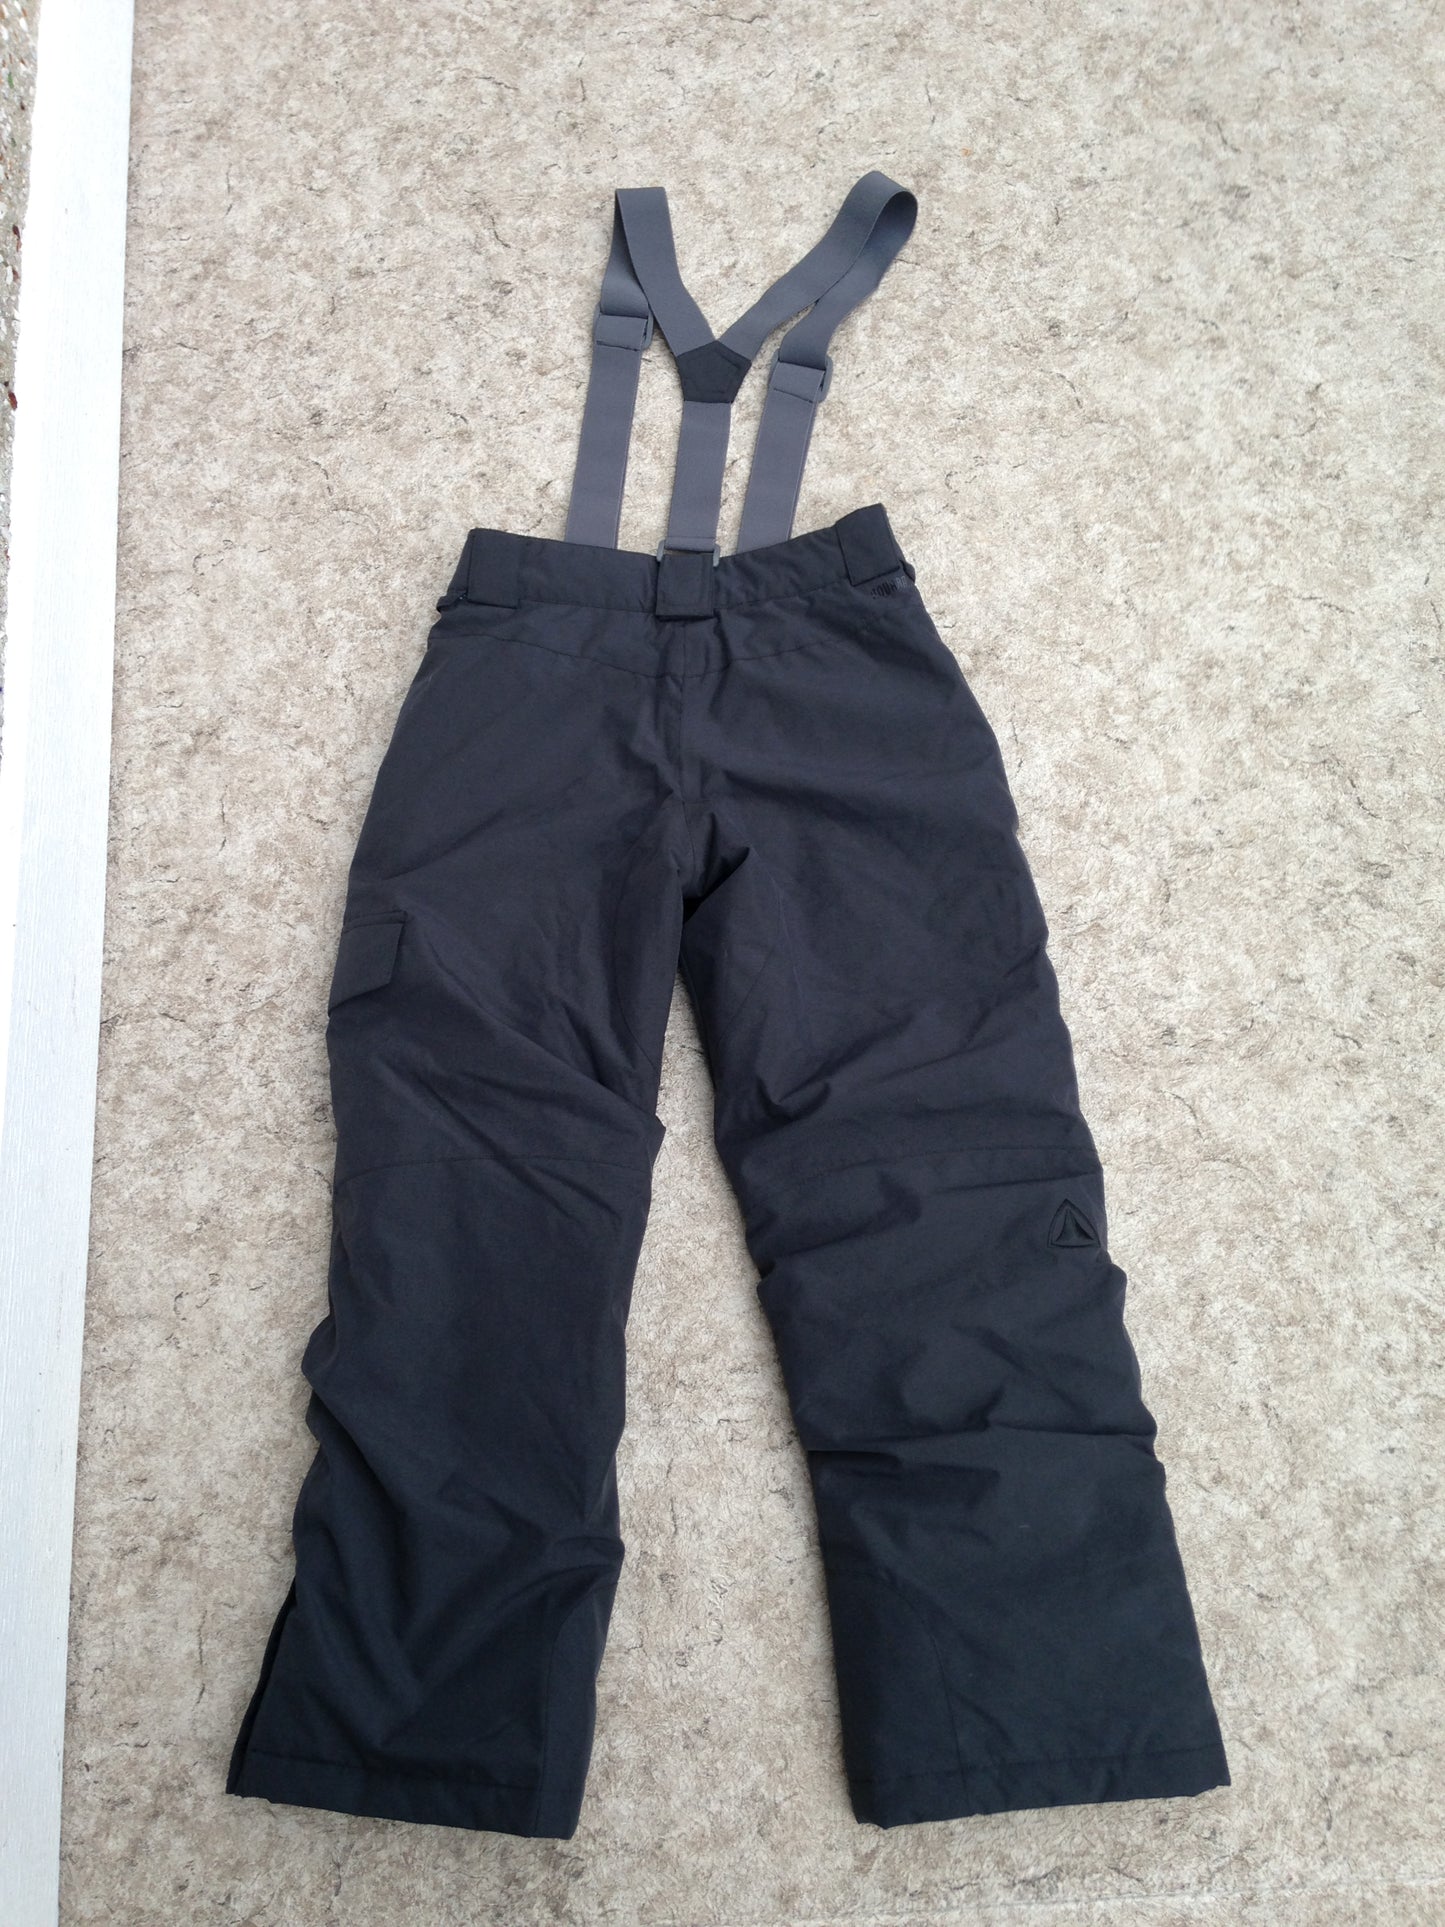 Snow Pants Child Size 12 Firefly With Removeable Straps Black Snowboarding New Demo Model